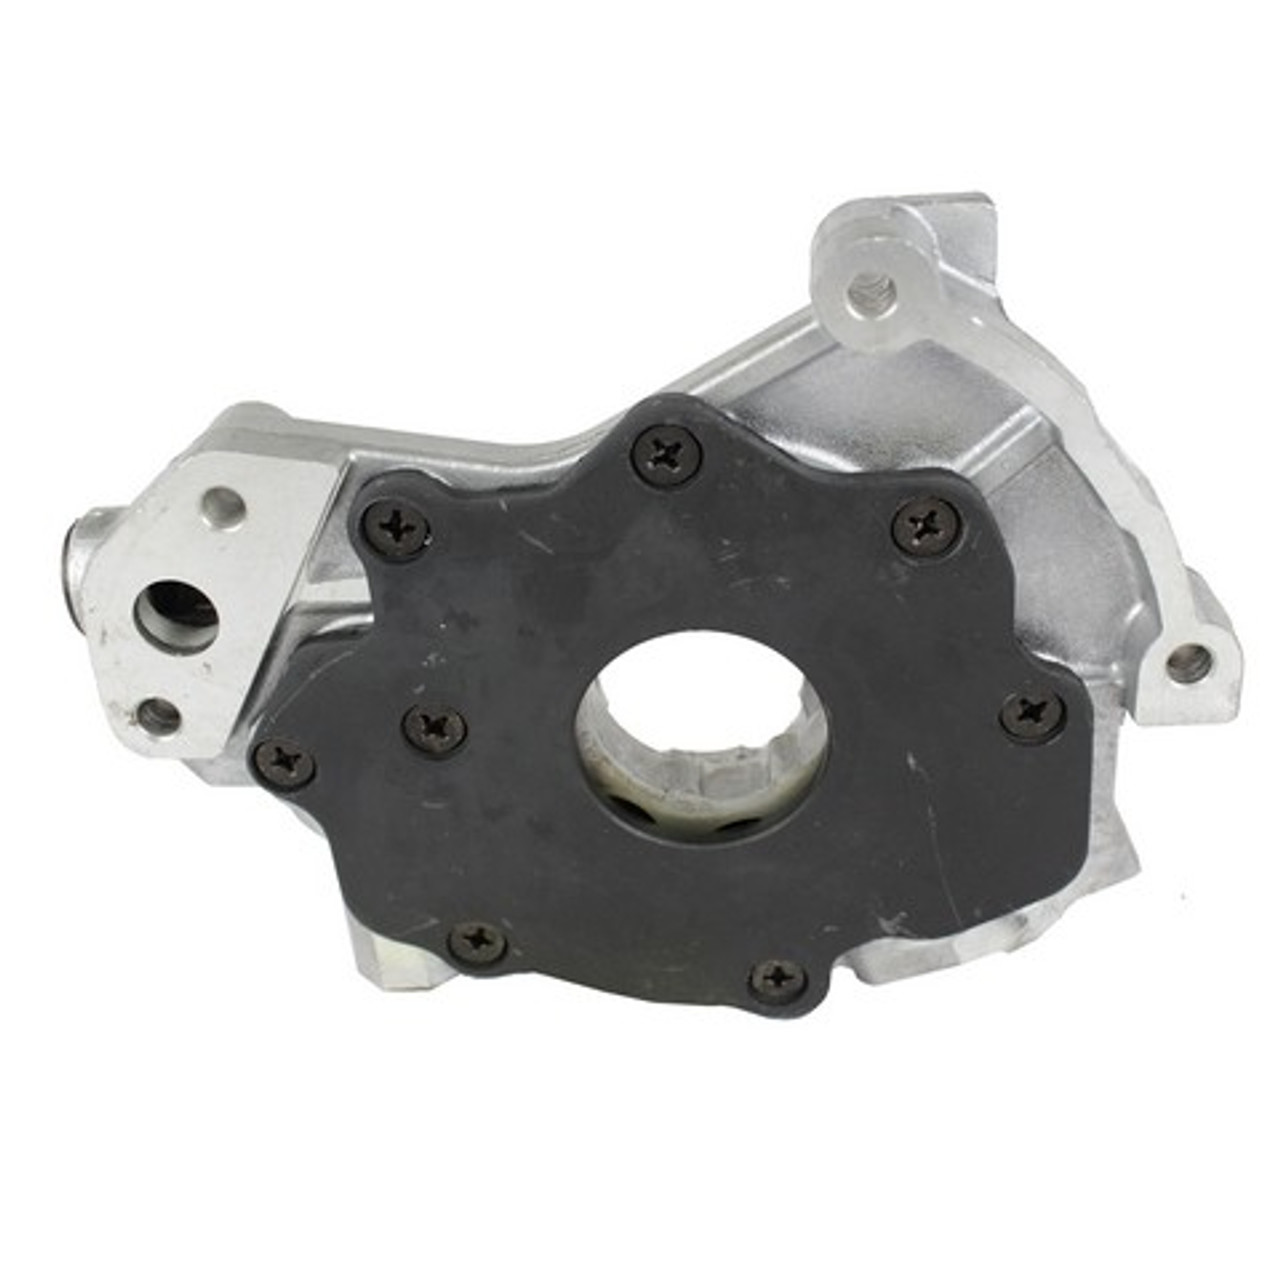 Oil Pump 5.4L 2007 Ford Expedition - OP4179.3